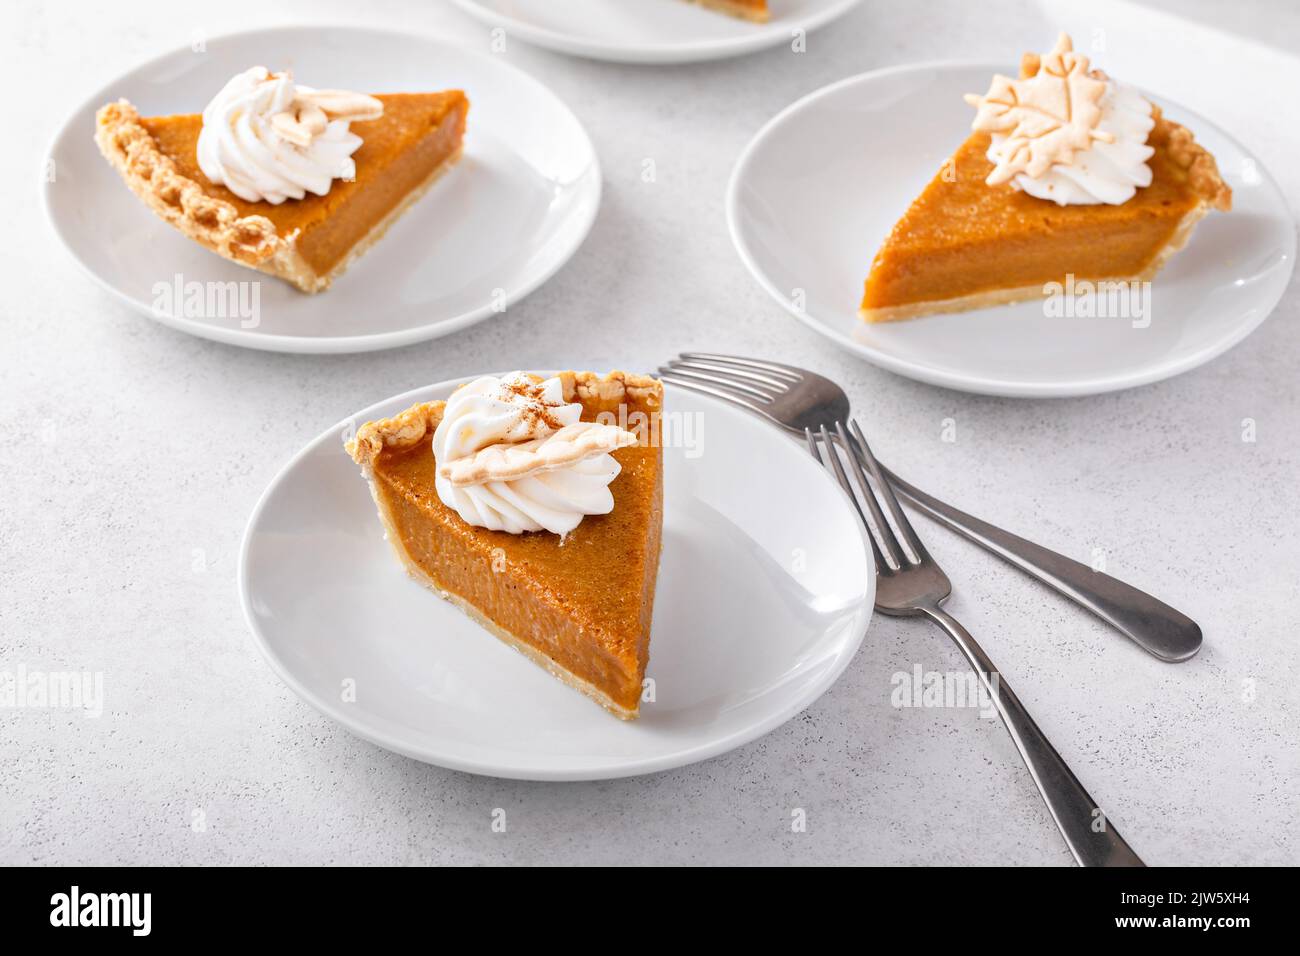 Slices of traditional pumpkin pie in a light and bright setting Stock Photo